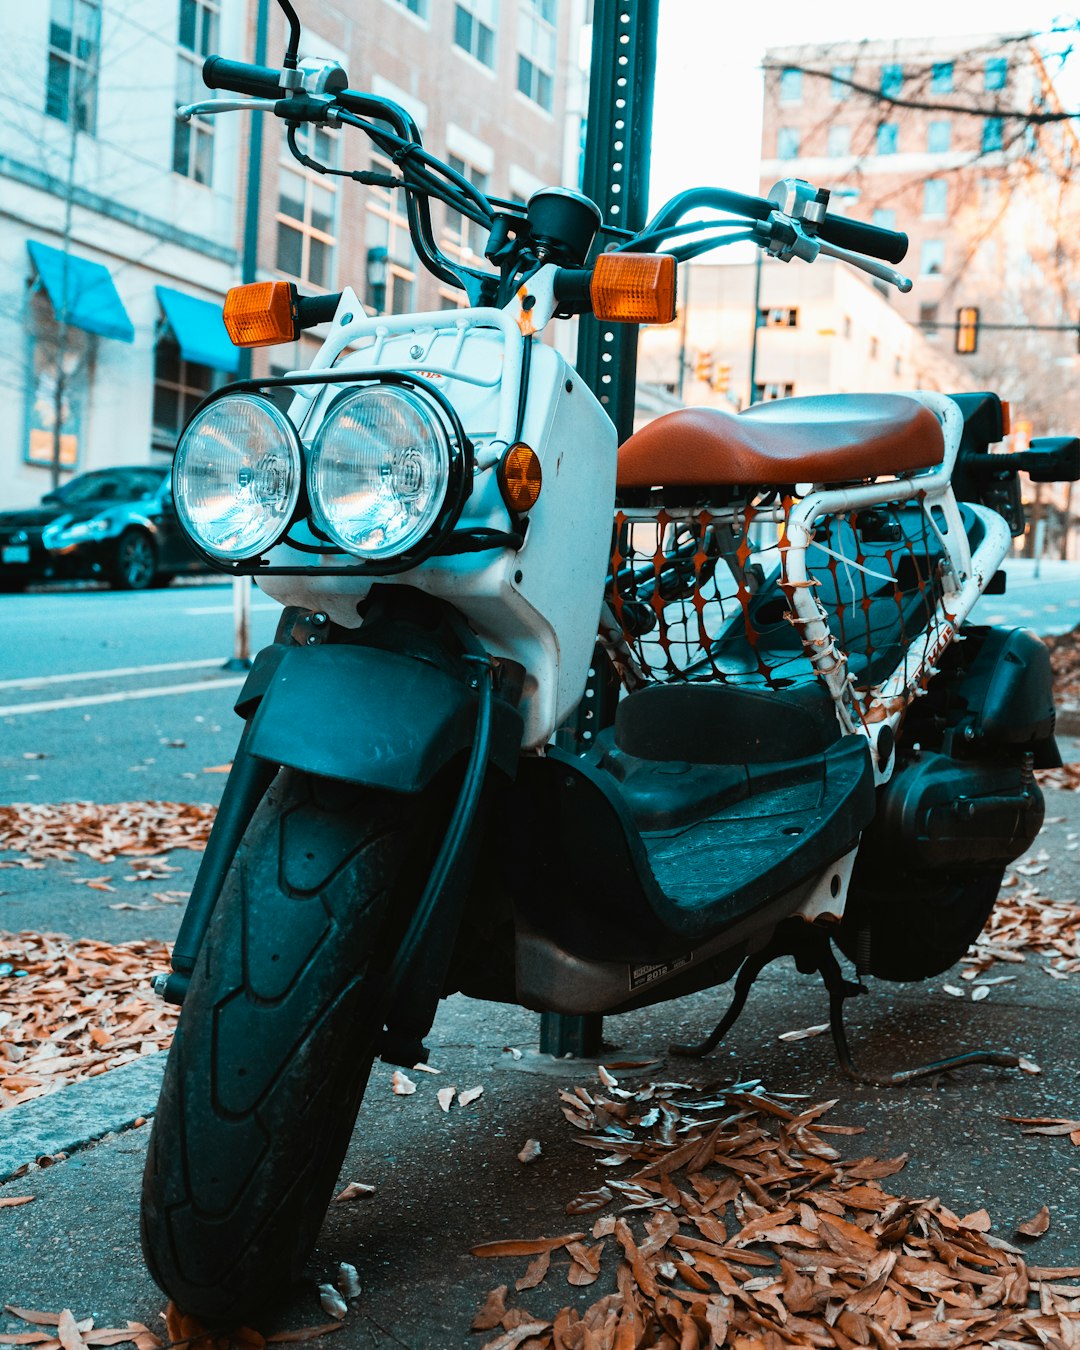 black and brown motorcycle on brown leaves during daytime